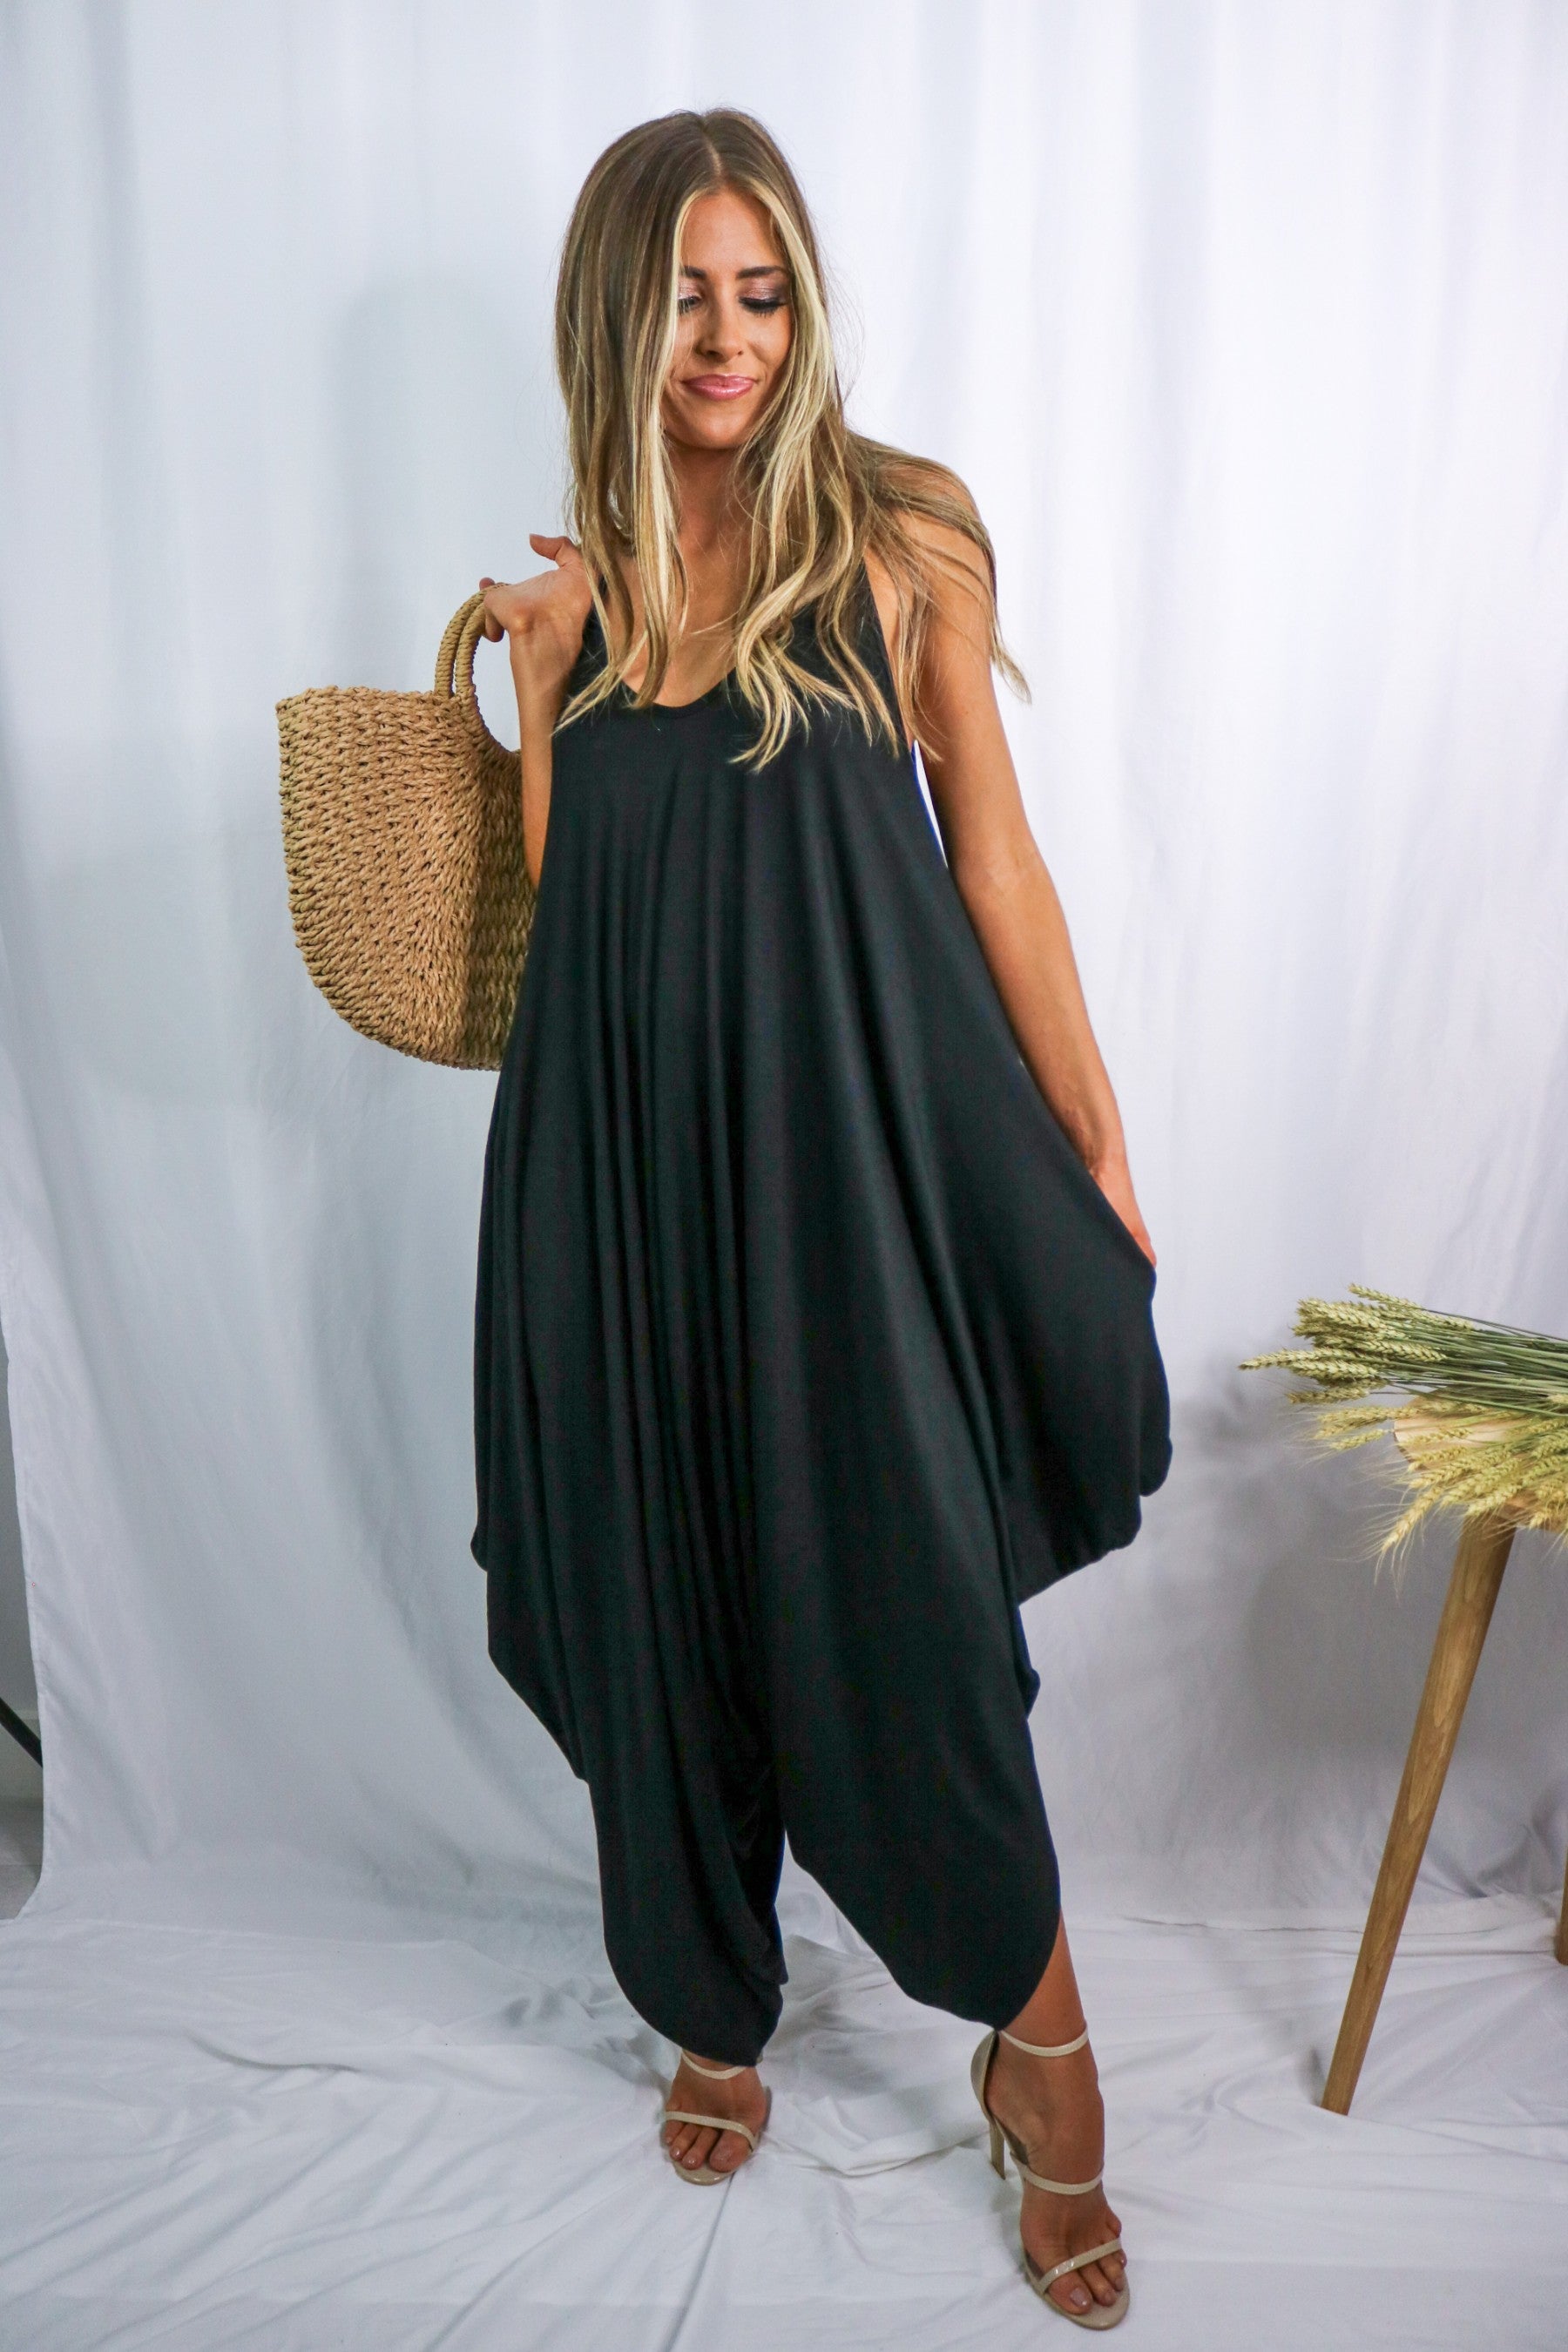 Blonde girl modeling a black boxy hi lo jumpsuit for Scarlette The Label, an online fashion boutique for women. Black jumpsuit has pockets and is lightweight and flowy. Paired with large straw bag.